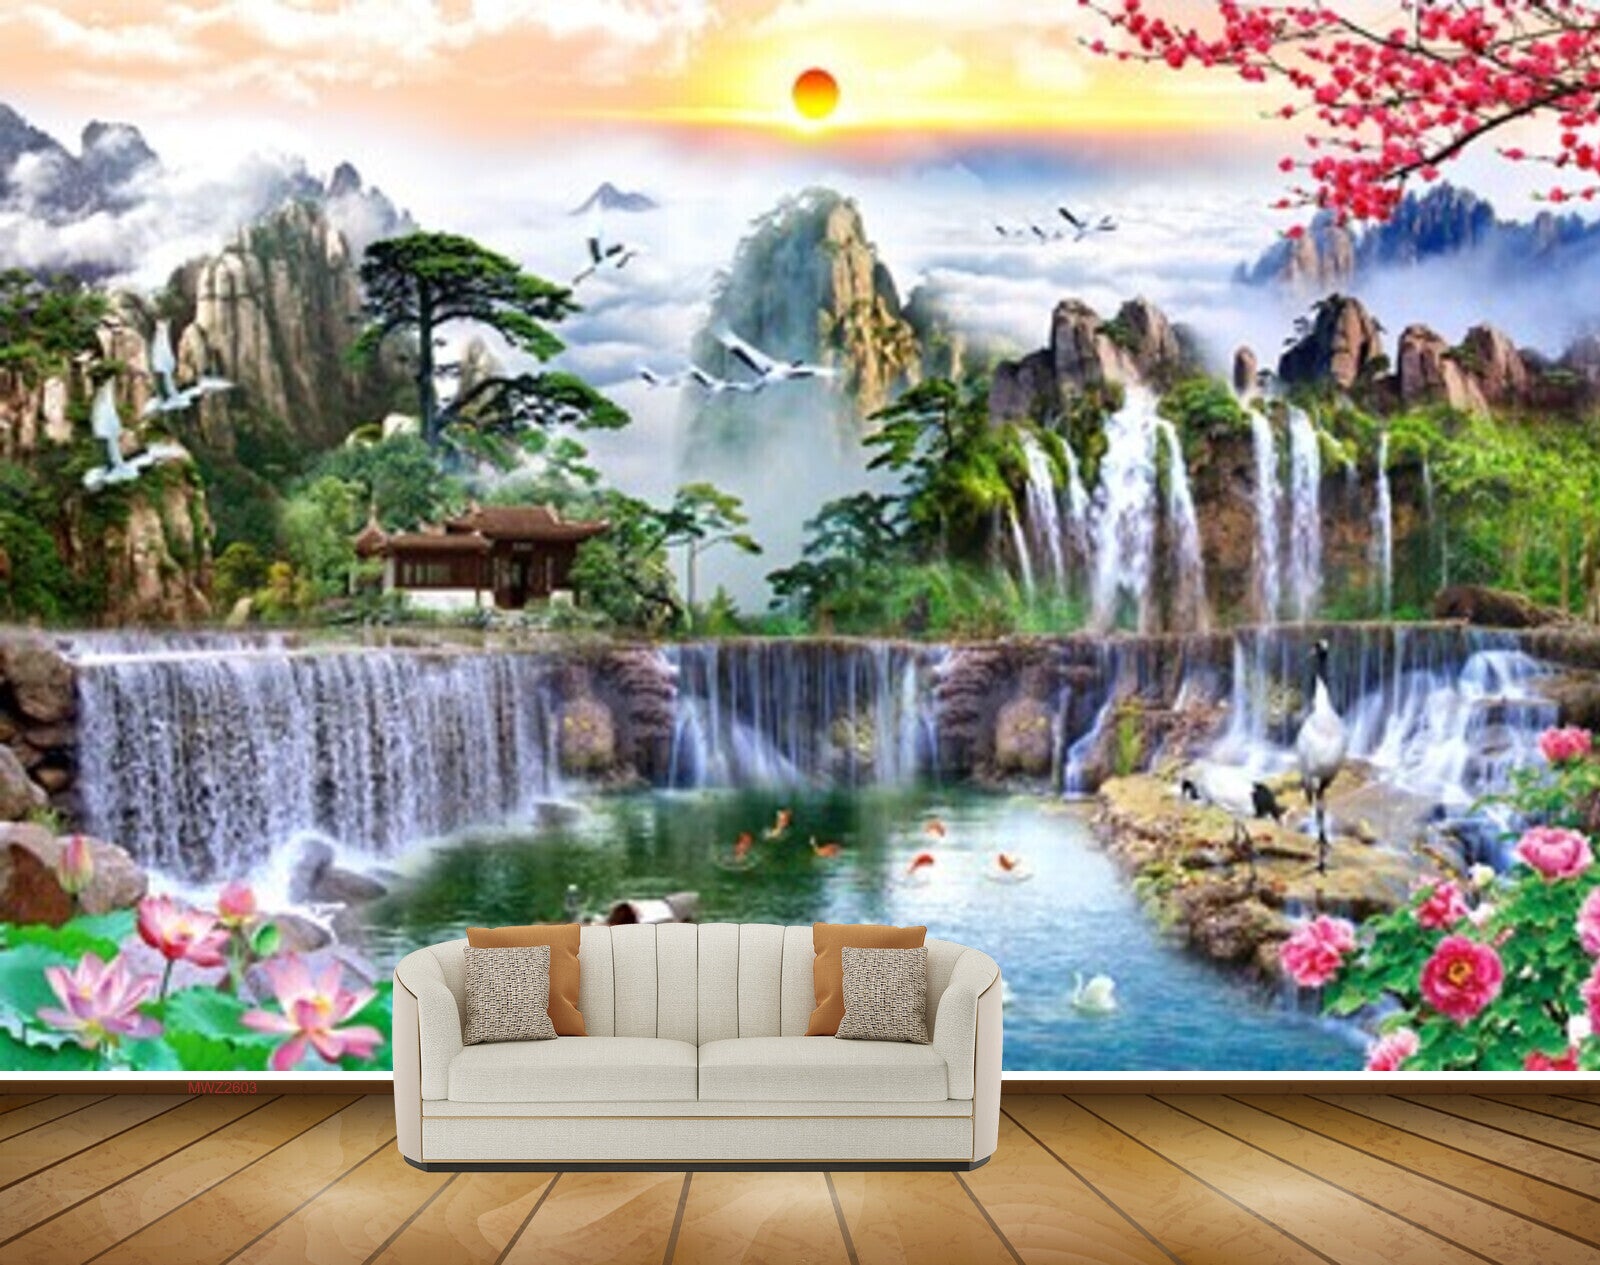 Avikalp MWZ2603 Sun Clouds Mountains Birds Waterfalls  House Flowers Trees Stones Lotus Boat Plants Pond River Water Fishes Duck Cranes HD Wallpaper